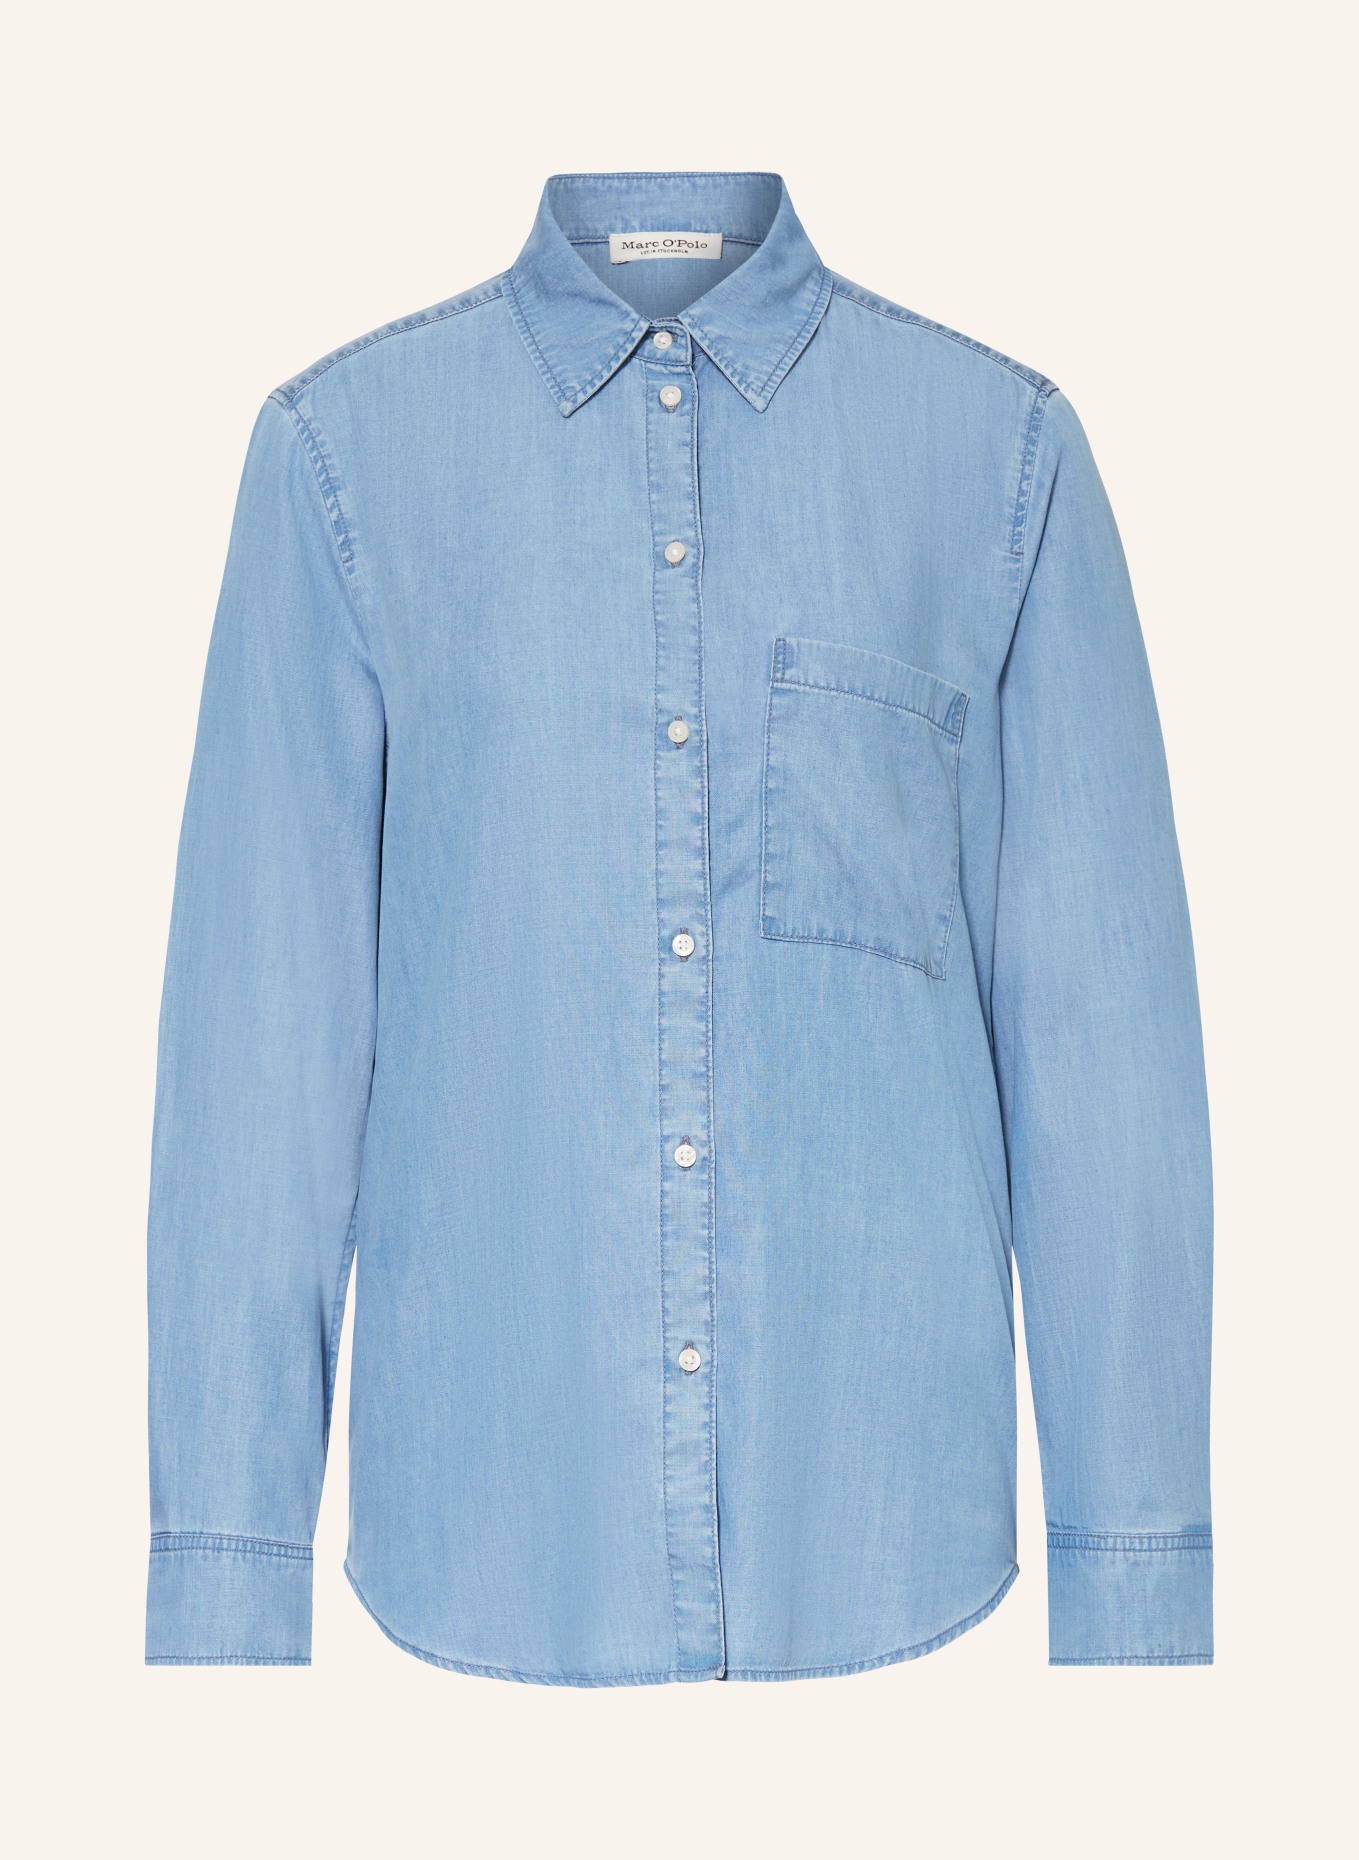 Marc O'Polo Shirt blouse in denim look, Color: LIGHT BLUE (Image 1)